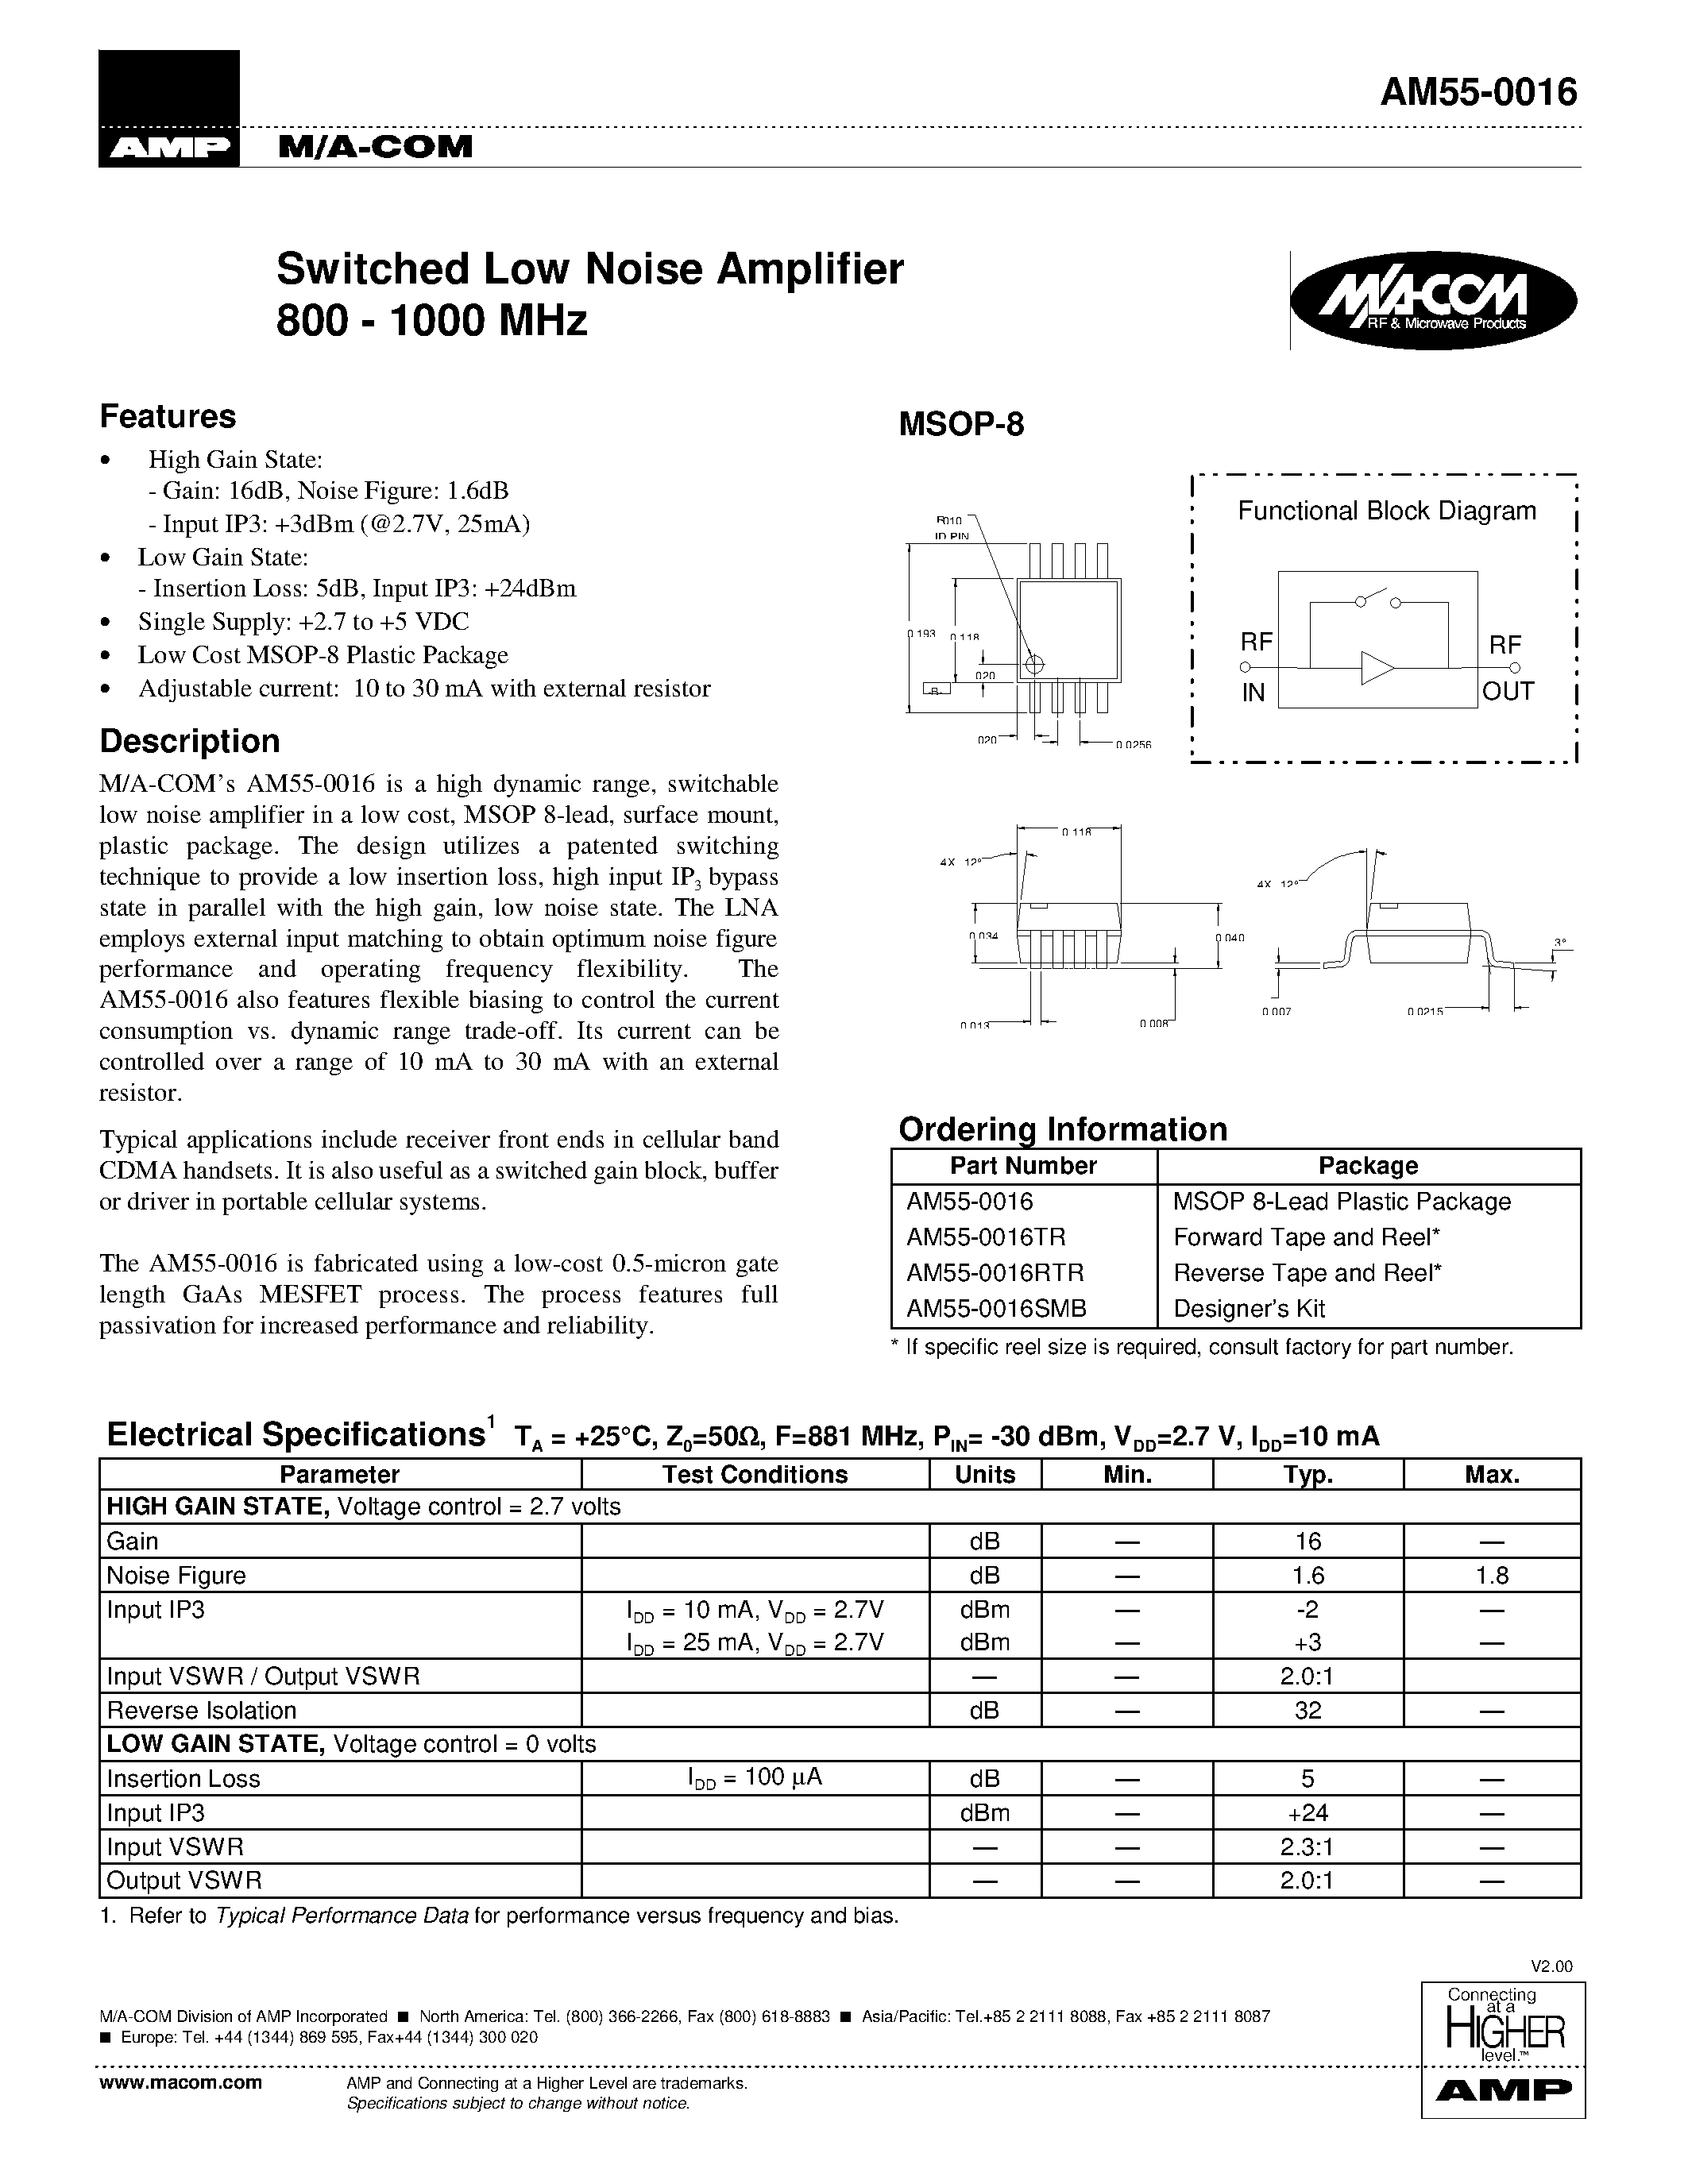 Datasheet AM55-0016RTR - Switched Low Noise Amplifier 800 - 1000 MHz page 1